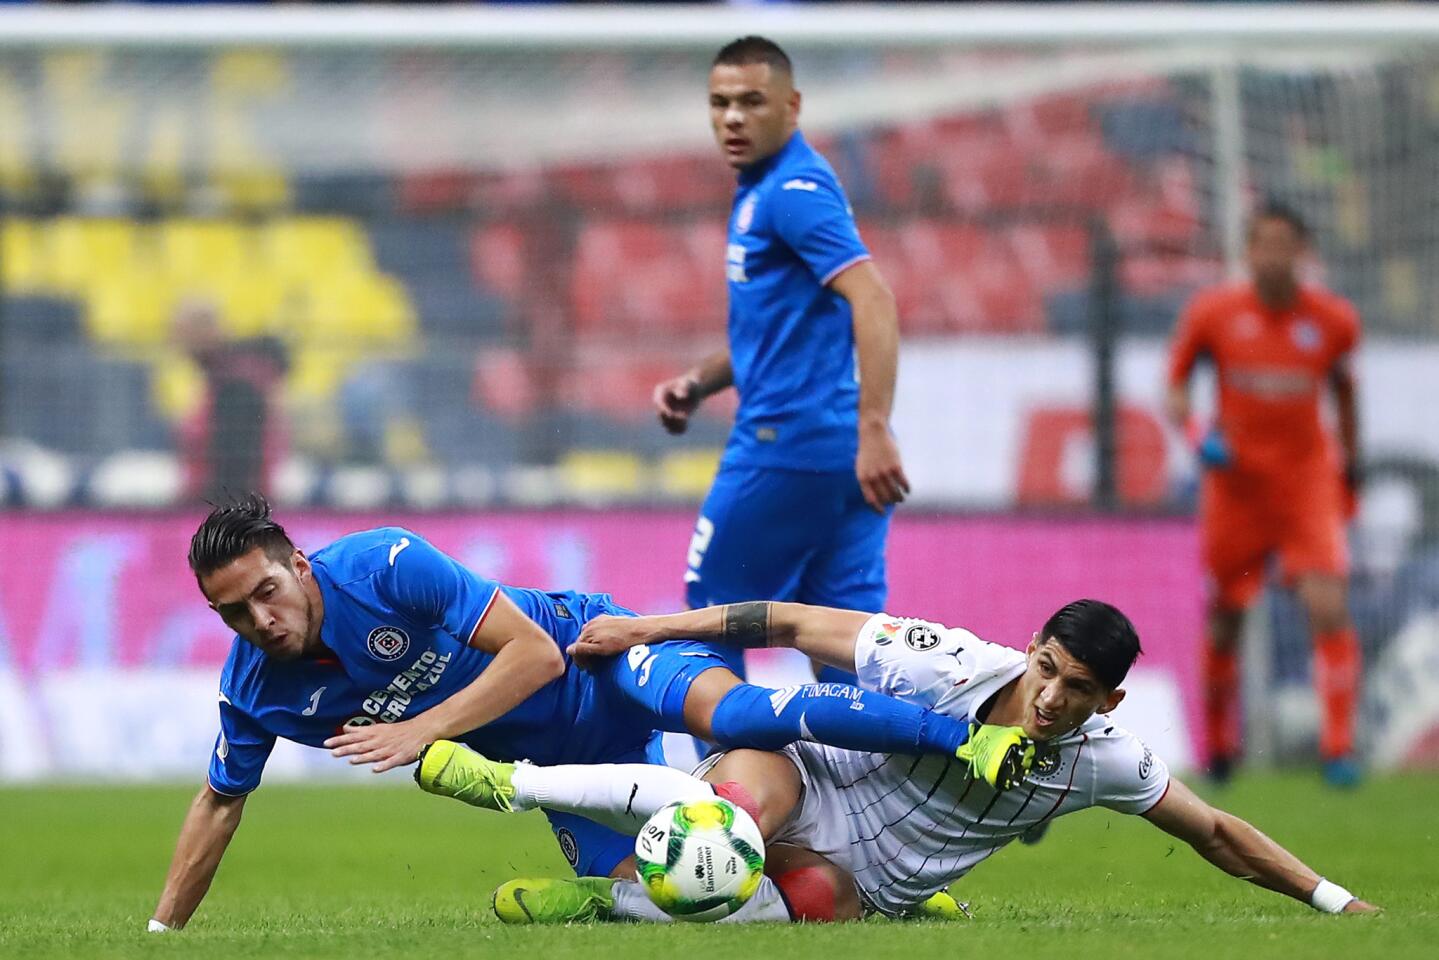 MEXICO CITY, MEXICO - JANUARY 12: Javier Salas #8 of Cruz Azul struggles for the ball with Alan Pulido #9 of Chivas during the 2nd round match between Cruz Azul and Chivas as part of the Torneo Clausura 2019 Liga MX at Azteca on January 12, 2019 in Mexico City, Mexico. (Photo by Hector Vivas/Getty Images) ** OUTS - ELSENT, FPG, CM - OUTS * NM, PH, VA if sourced by CT, LA or MoD **